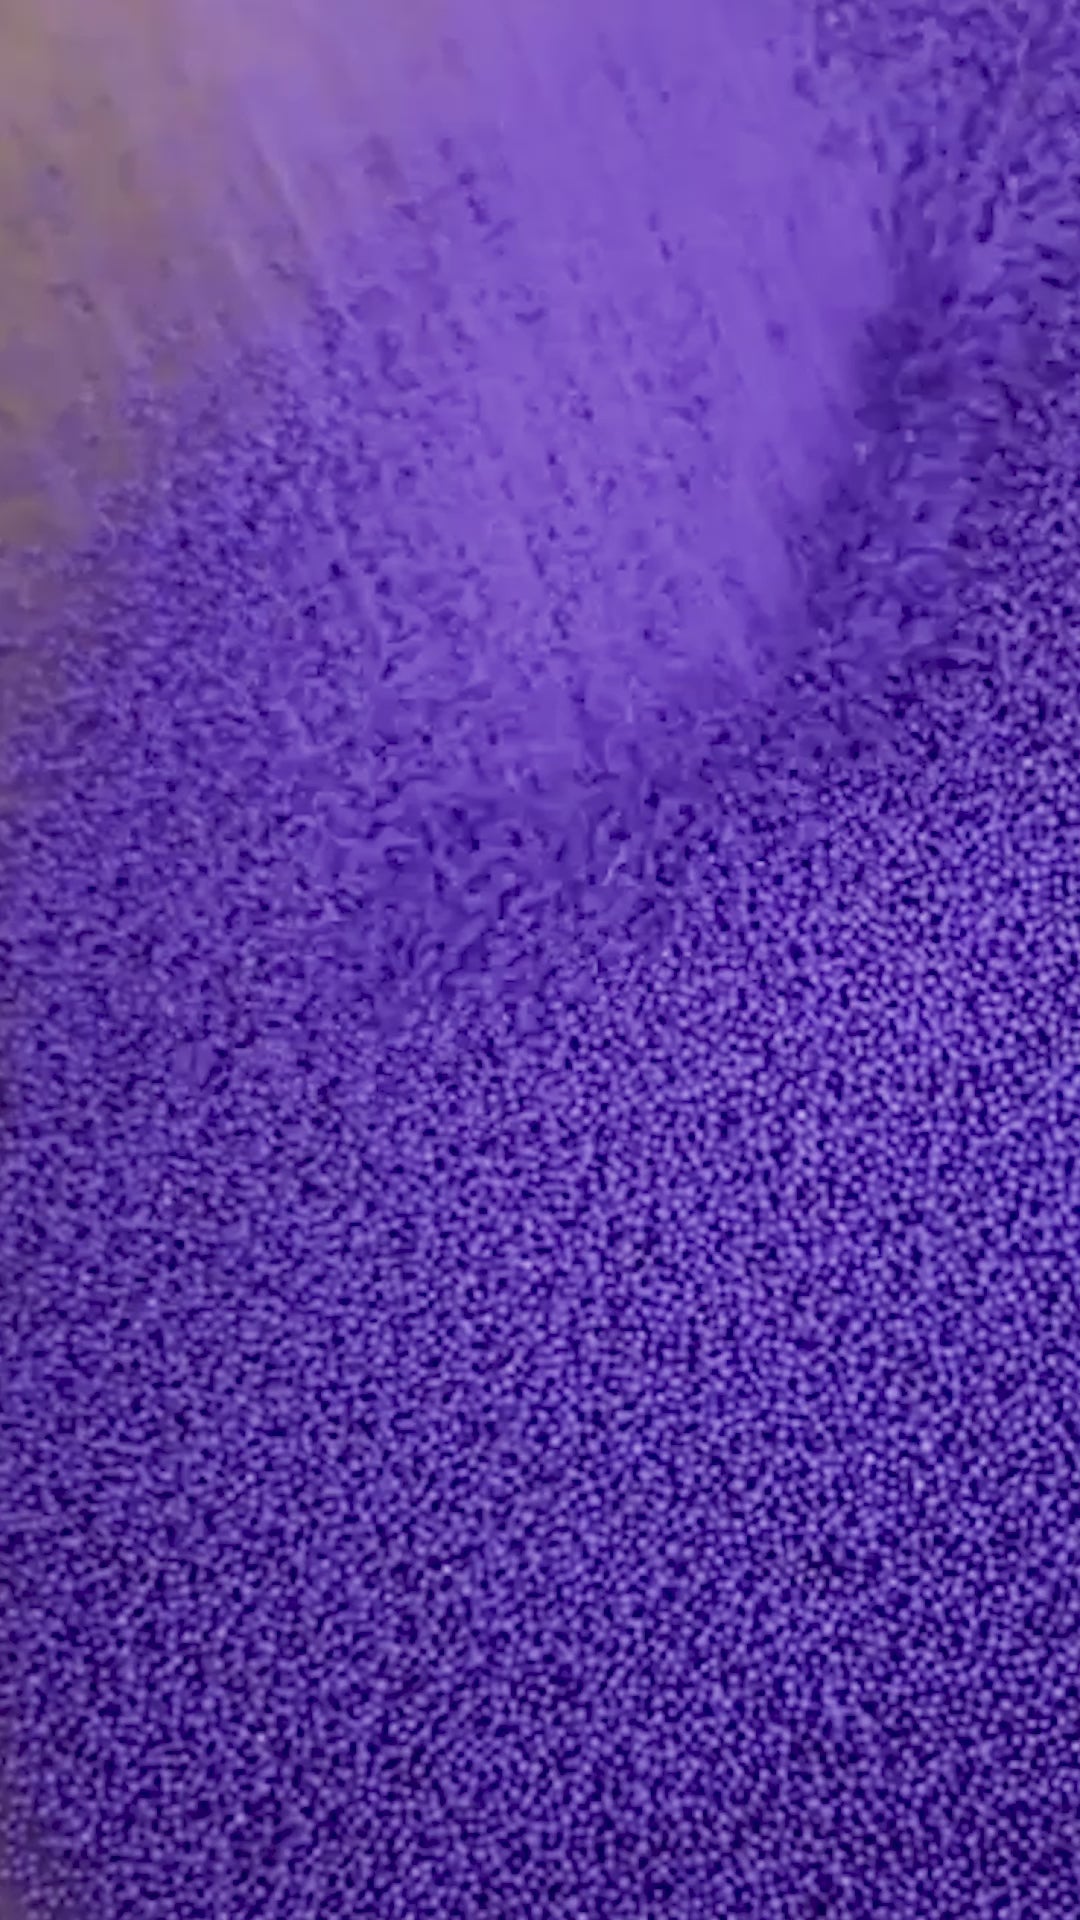 Video of the production of OSKIA's Violet Water Clearing Cleanser